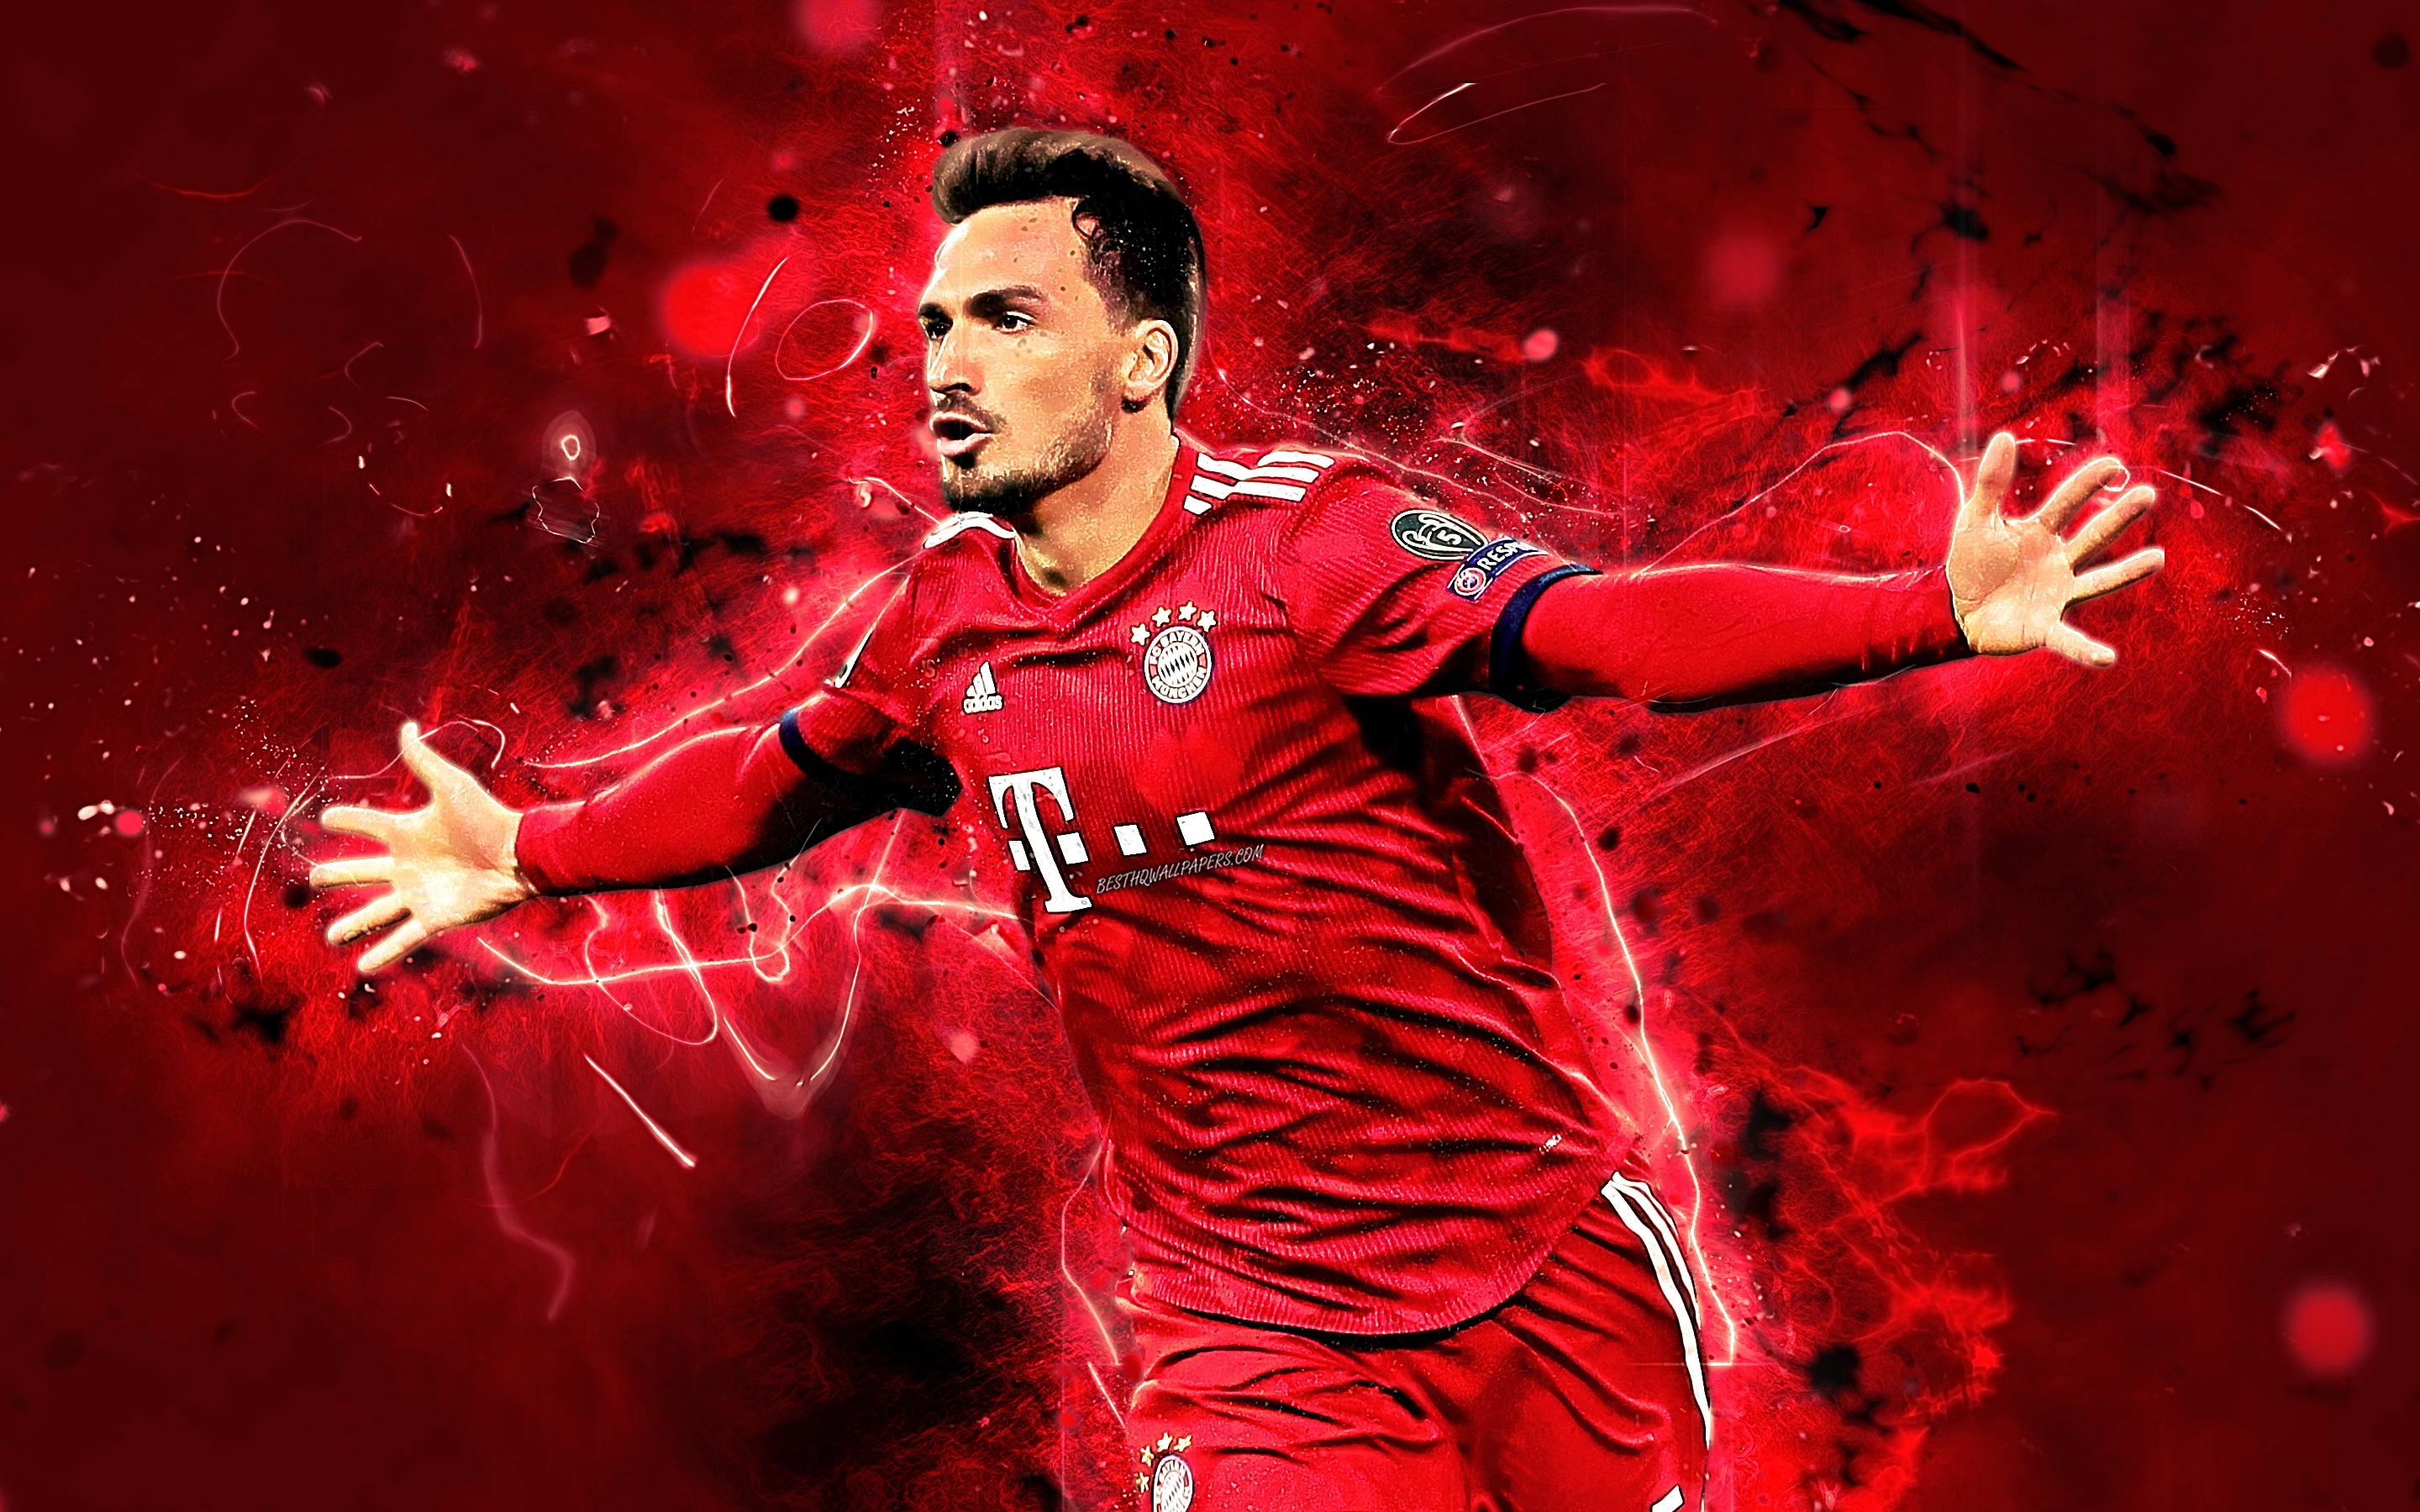 Download wallpapers mats hummels german footballers bayern munich fc germany soccer hummels bundesliga neon lights for desktop with resolution x high quality hd pictures wallpapers